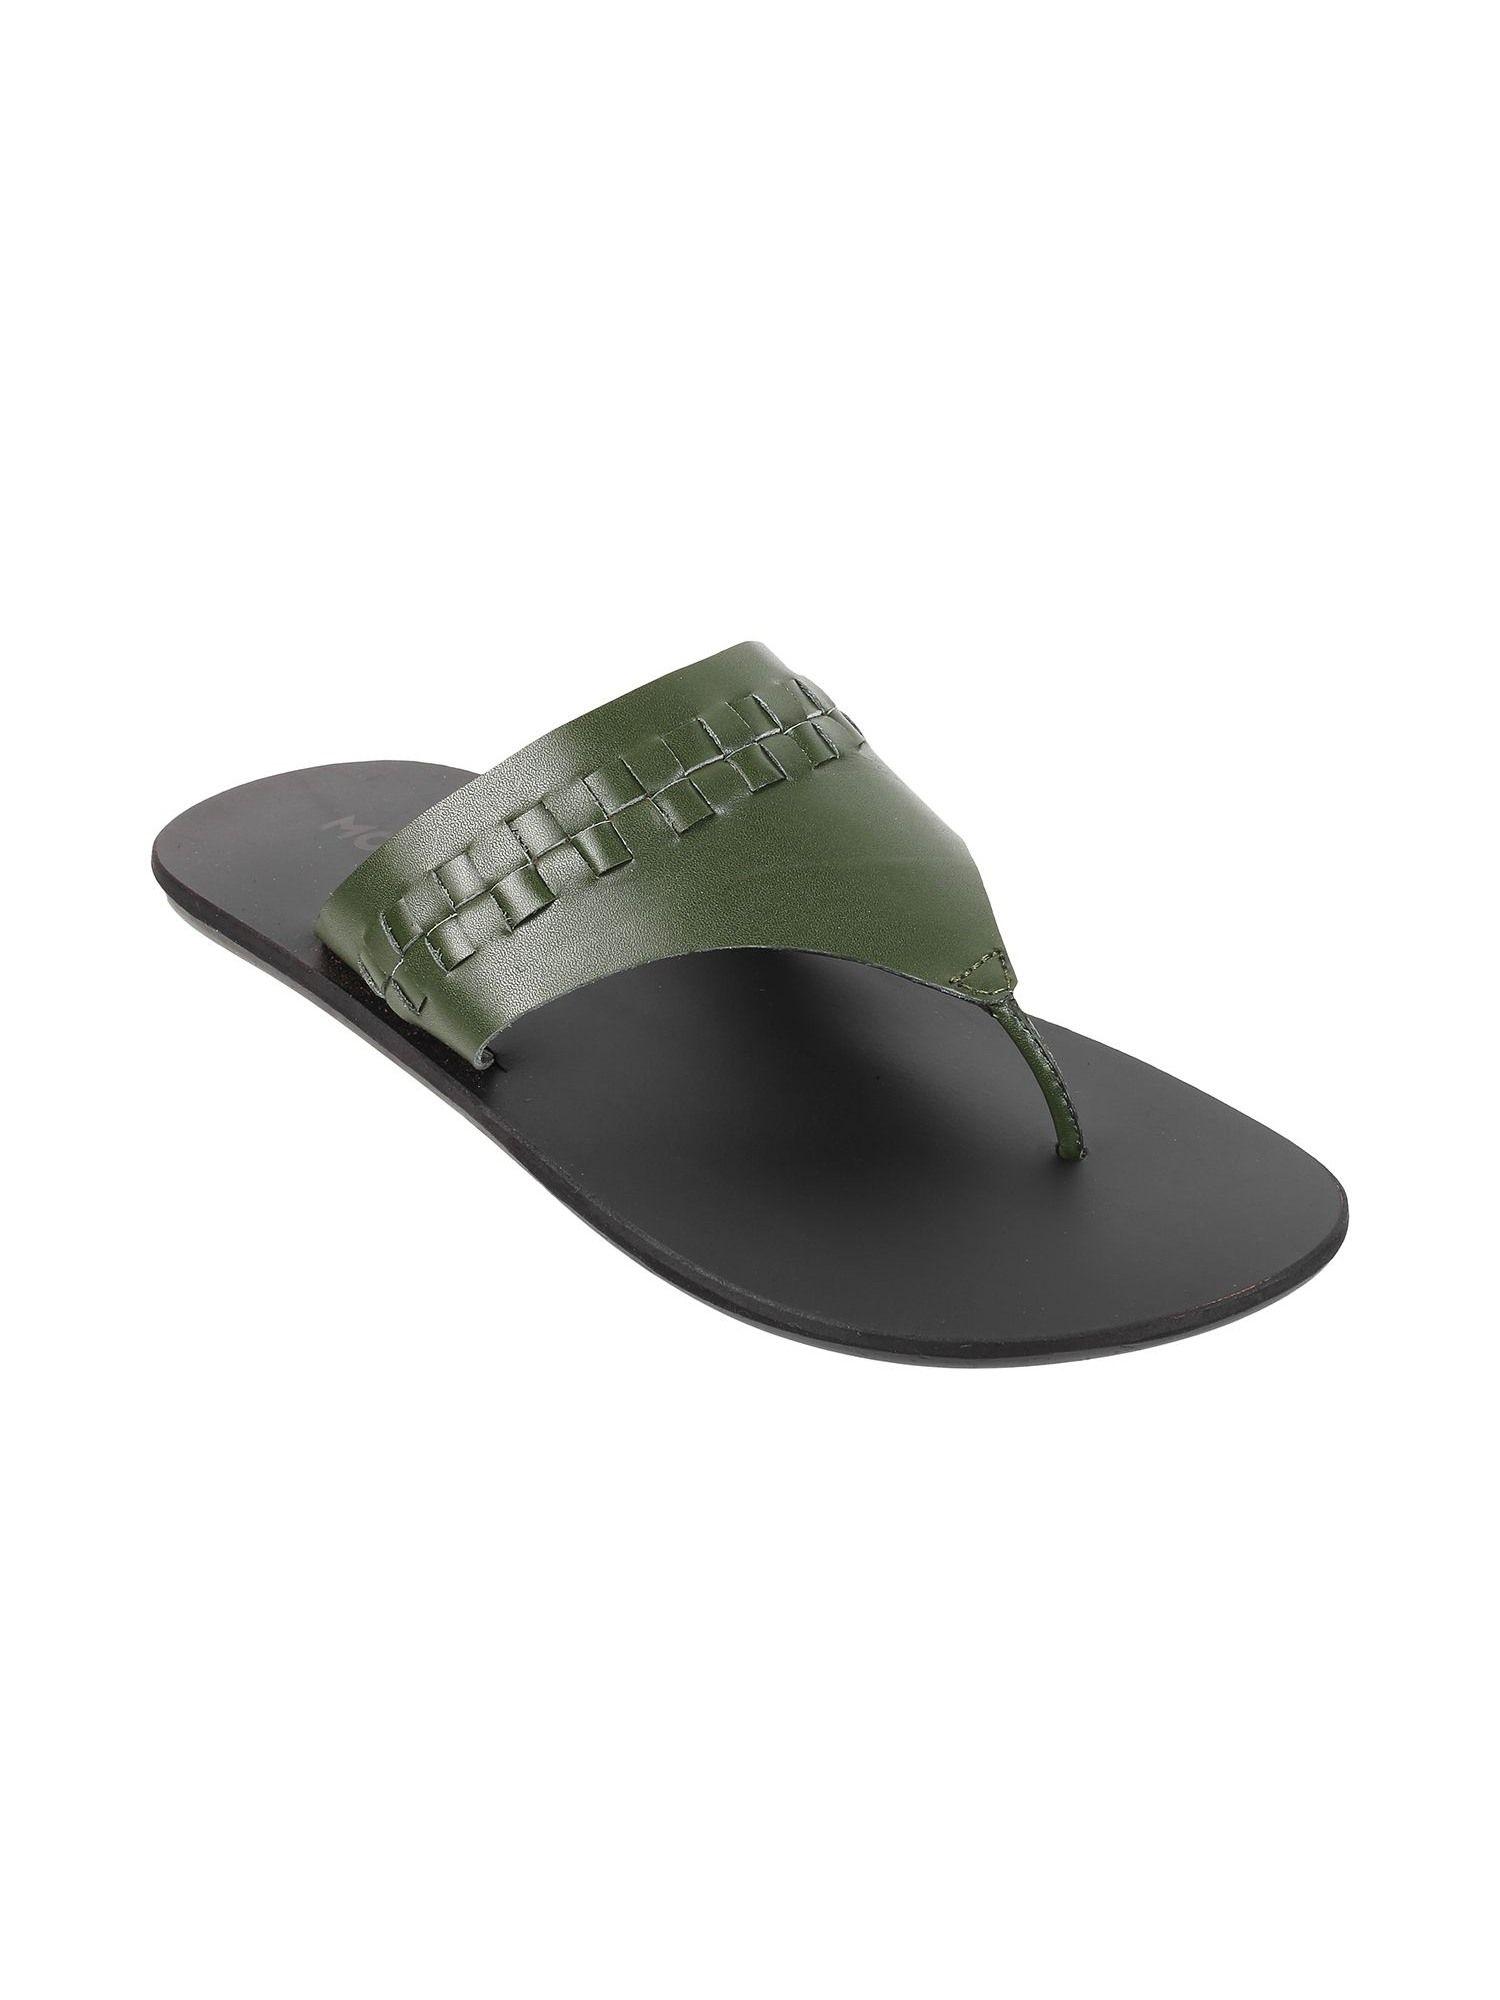 men-leather-olive-green-slippers